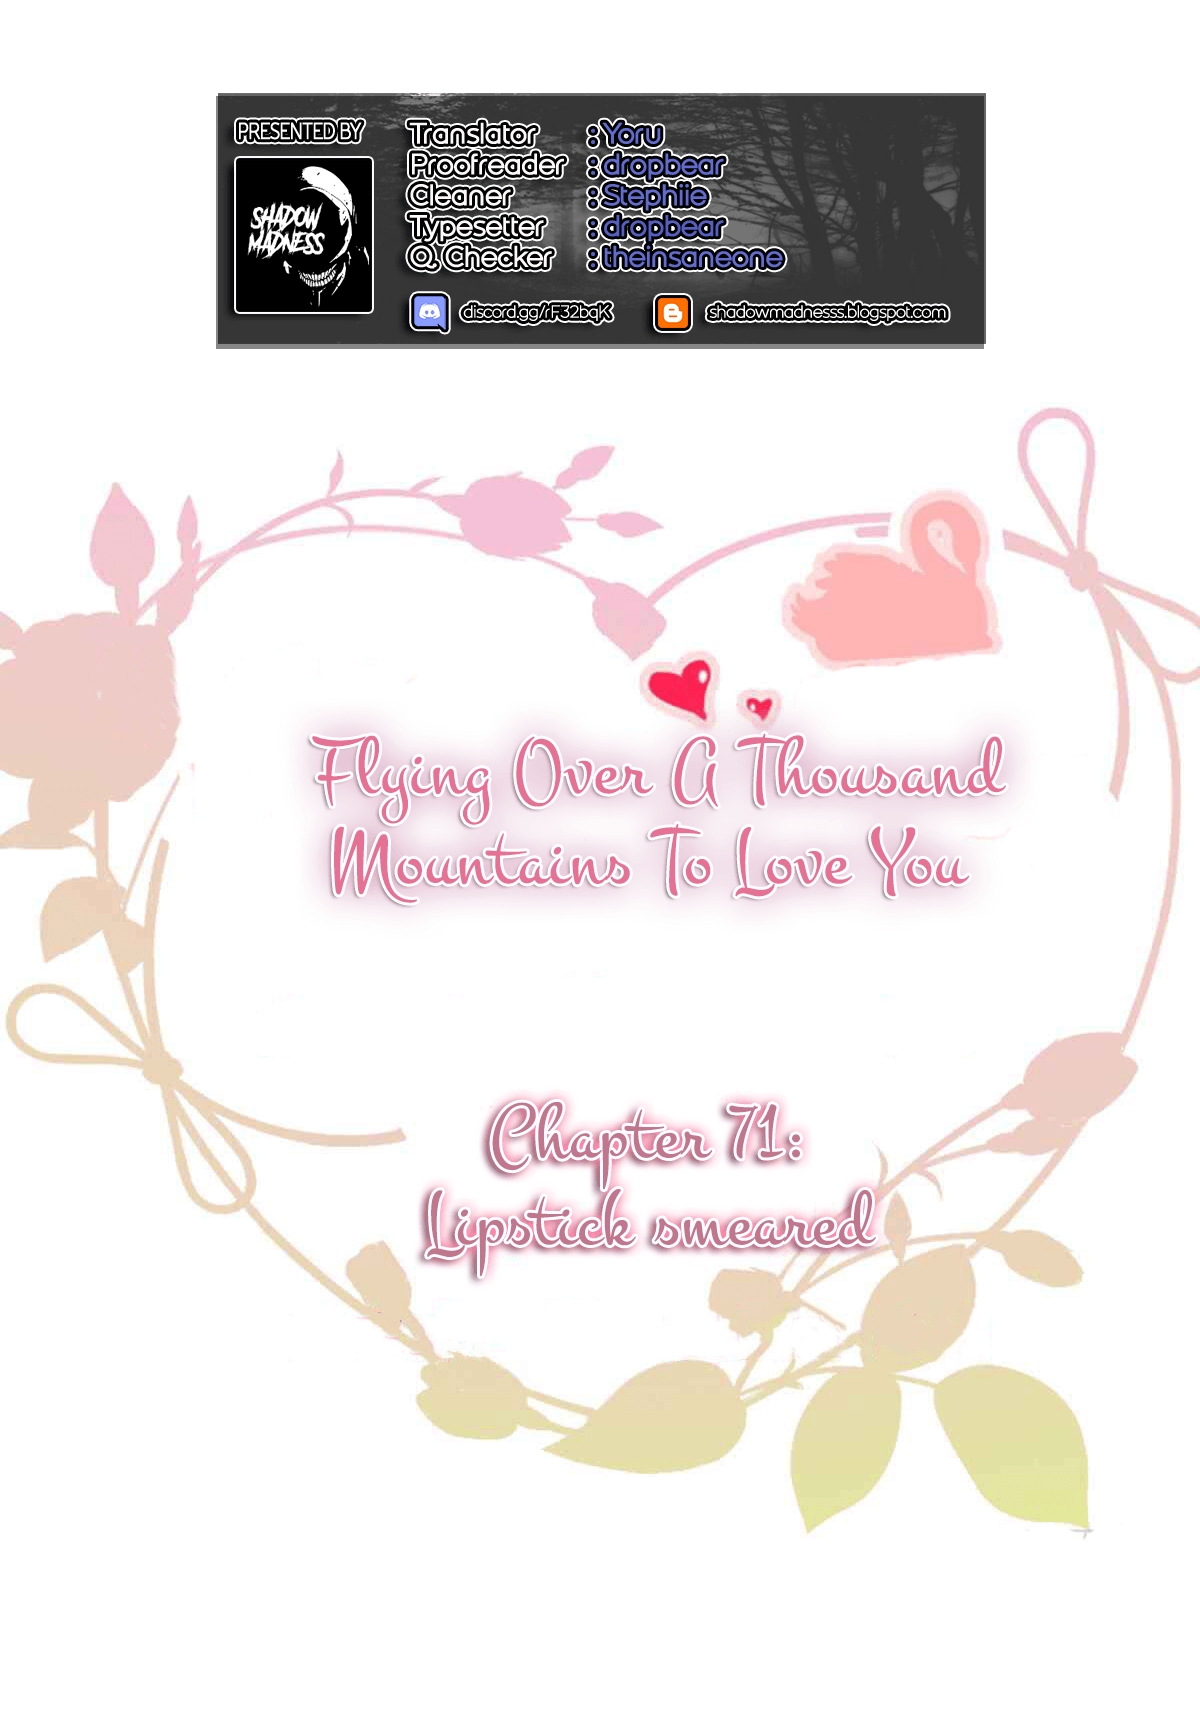 Flying Over a Thousand Mountains to Love You Ch. 71 Lipstick smeared